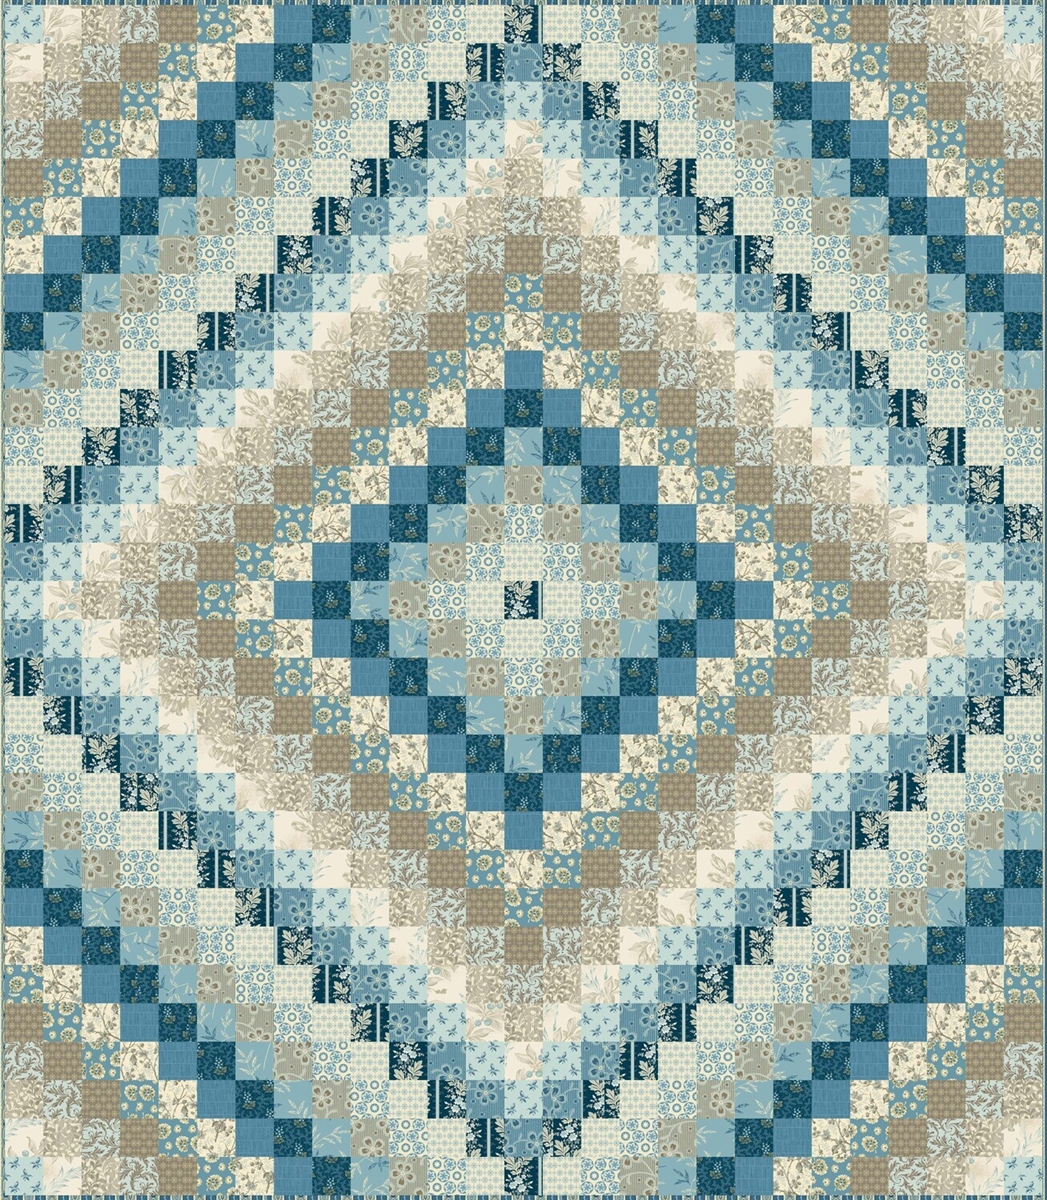 New Quilt Book: Blue and White Quilts 